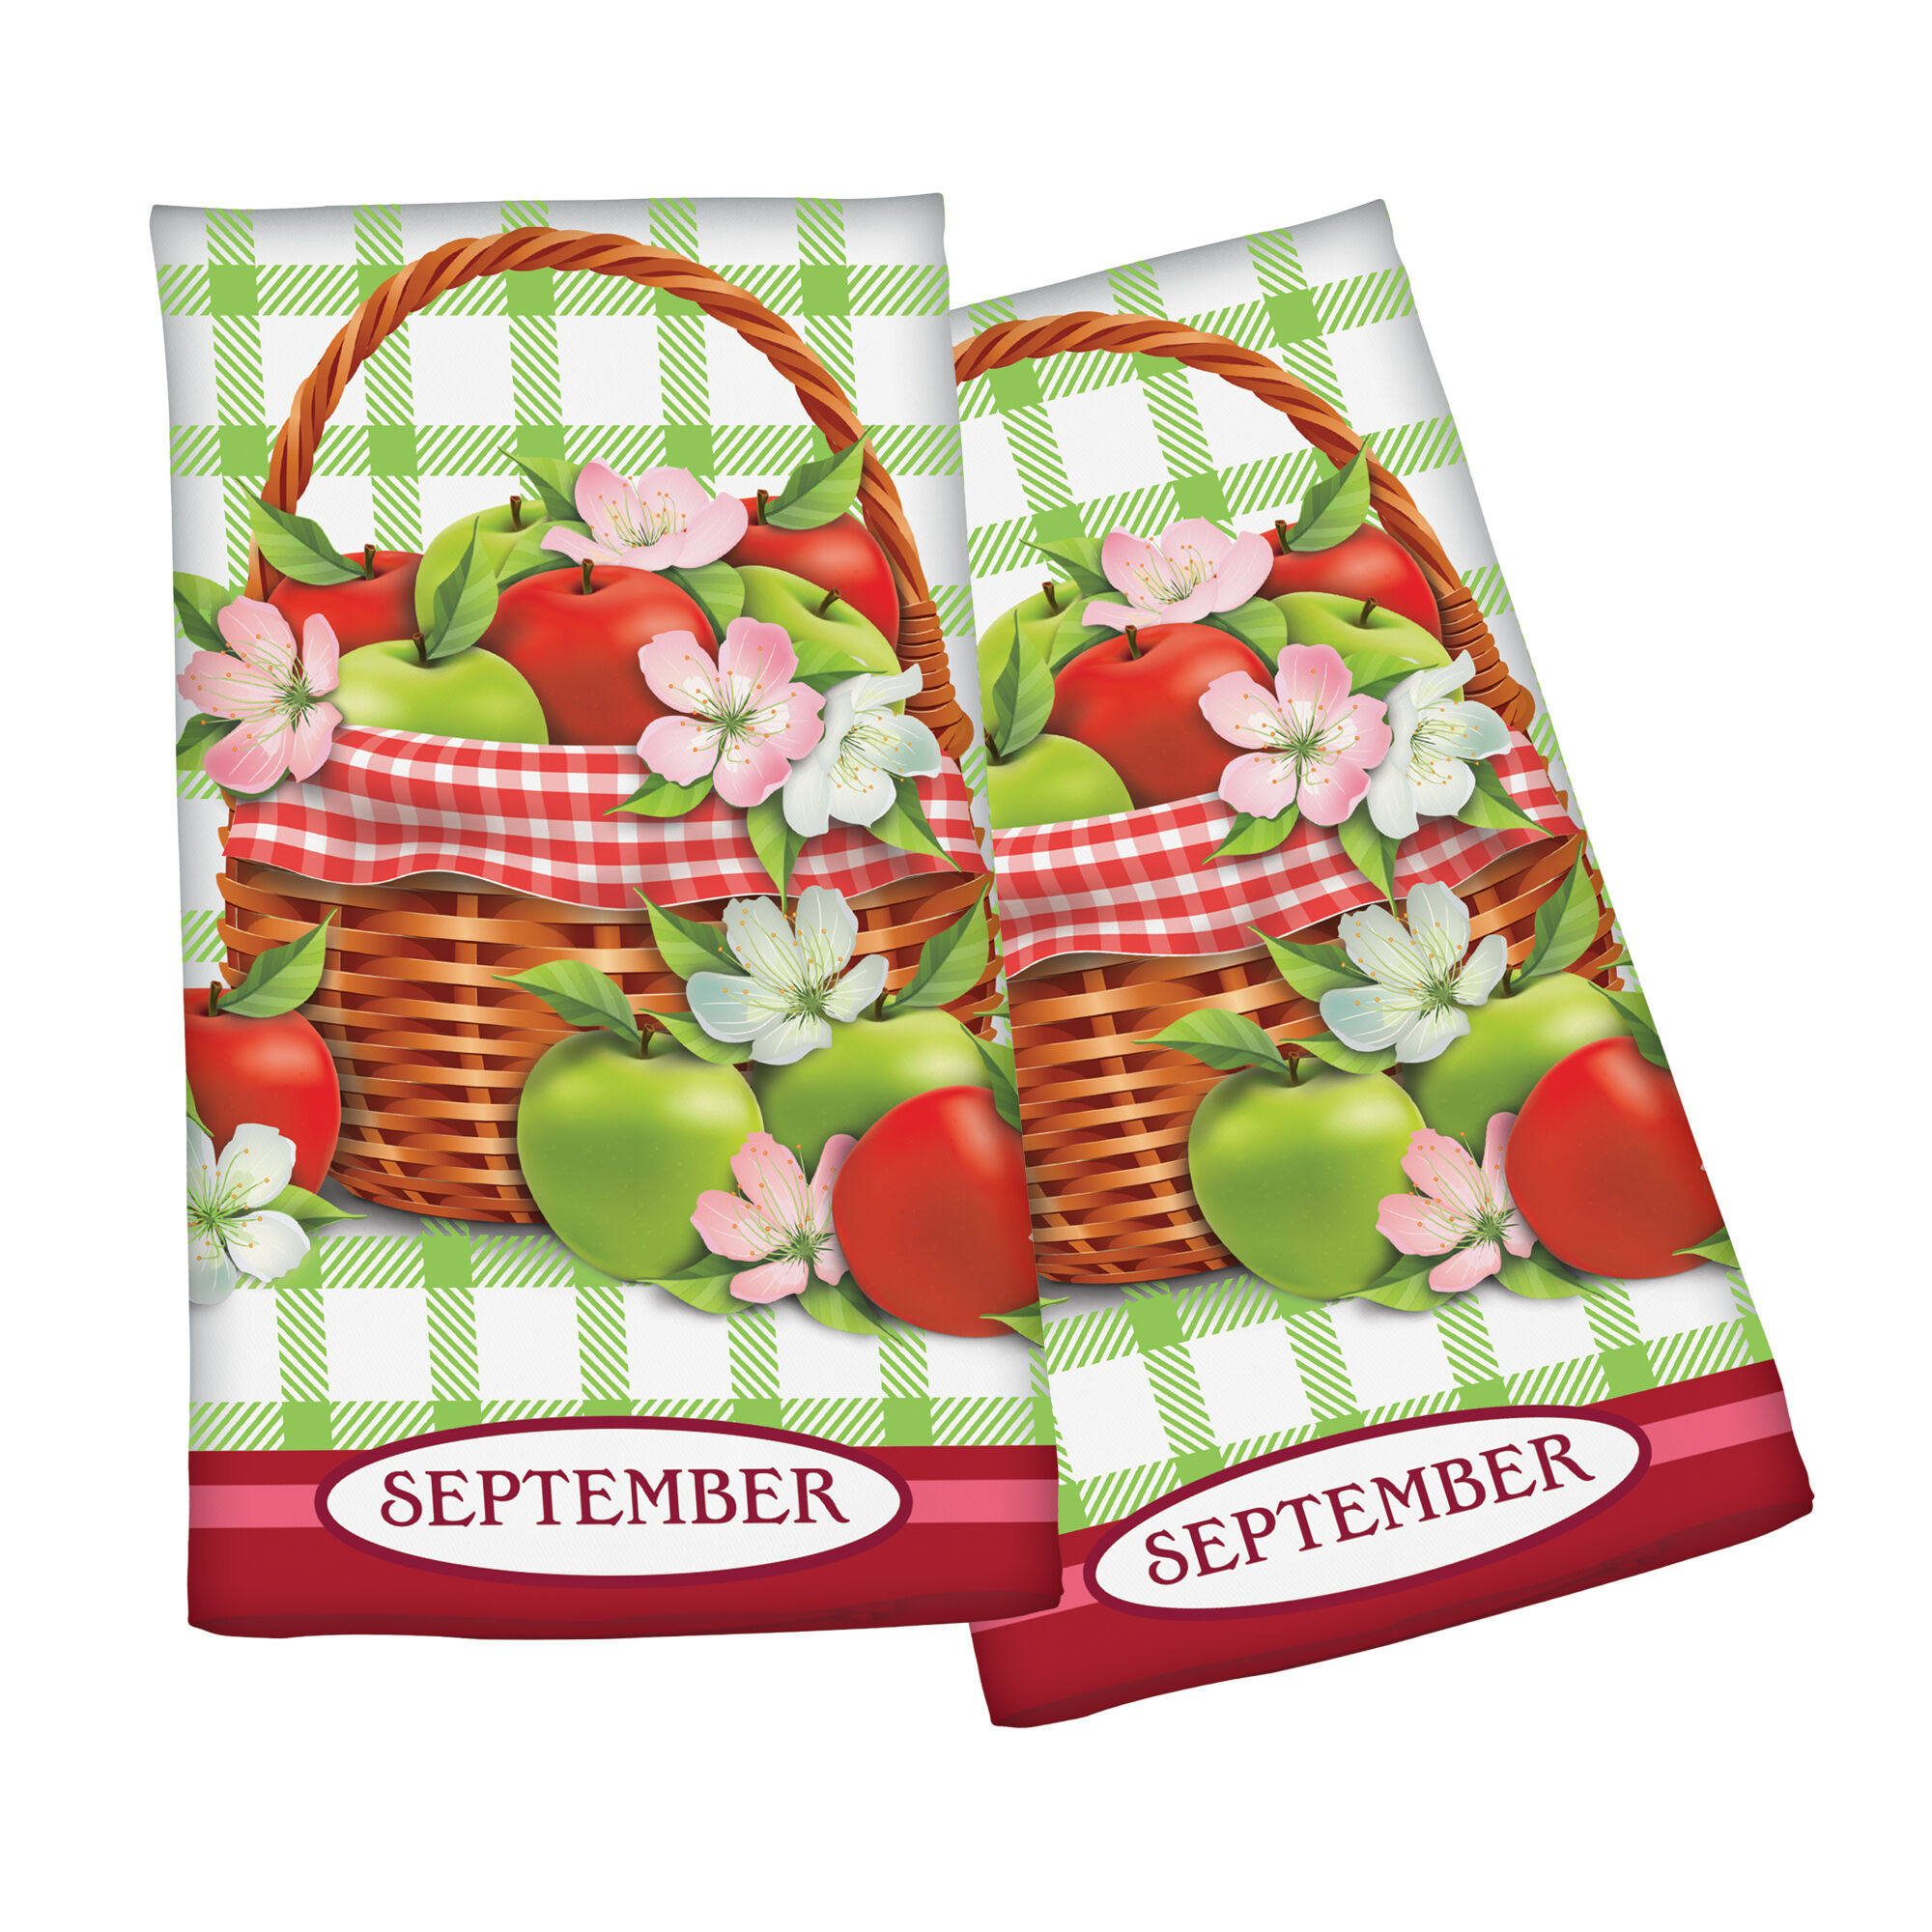 Year of Cheer Kitchen Towel Collection 6844 0015 e septmber